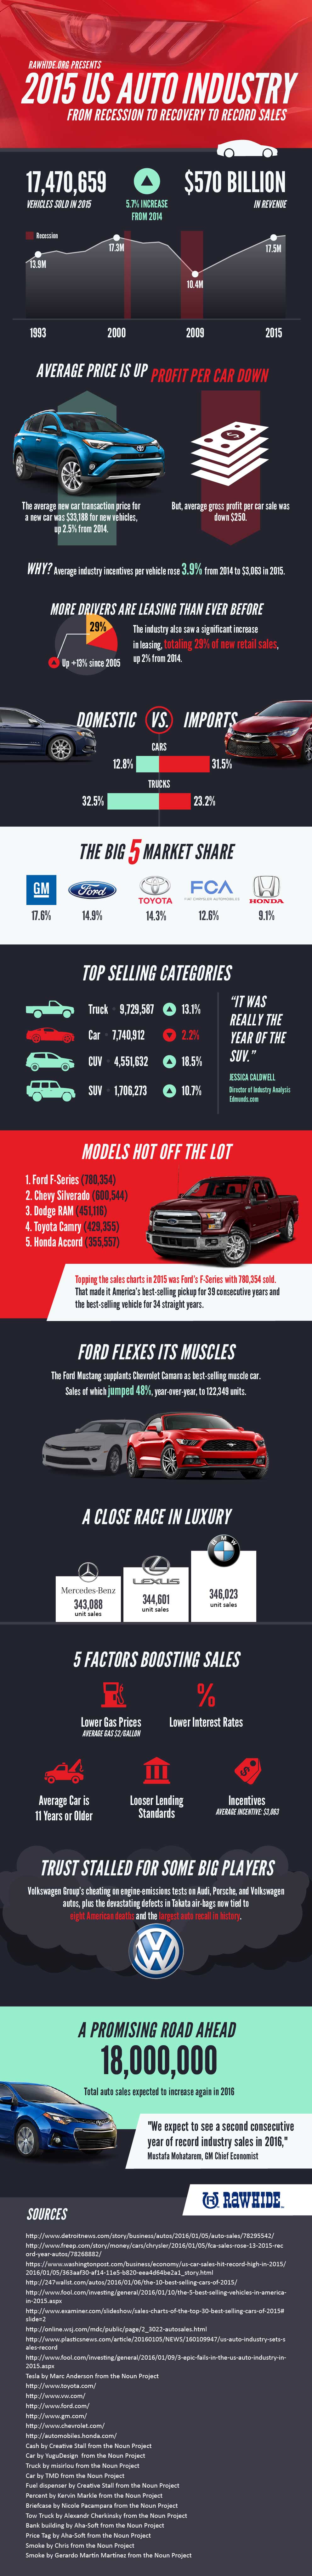 2015 USA Auto Sales by the Numbers (Graphic)